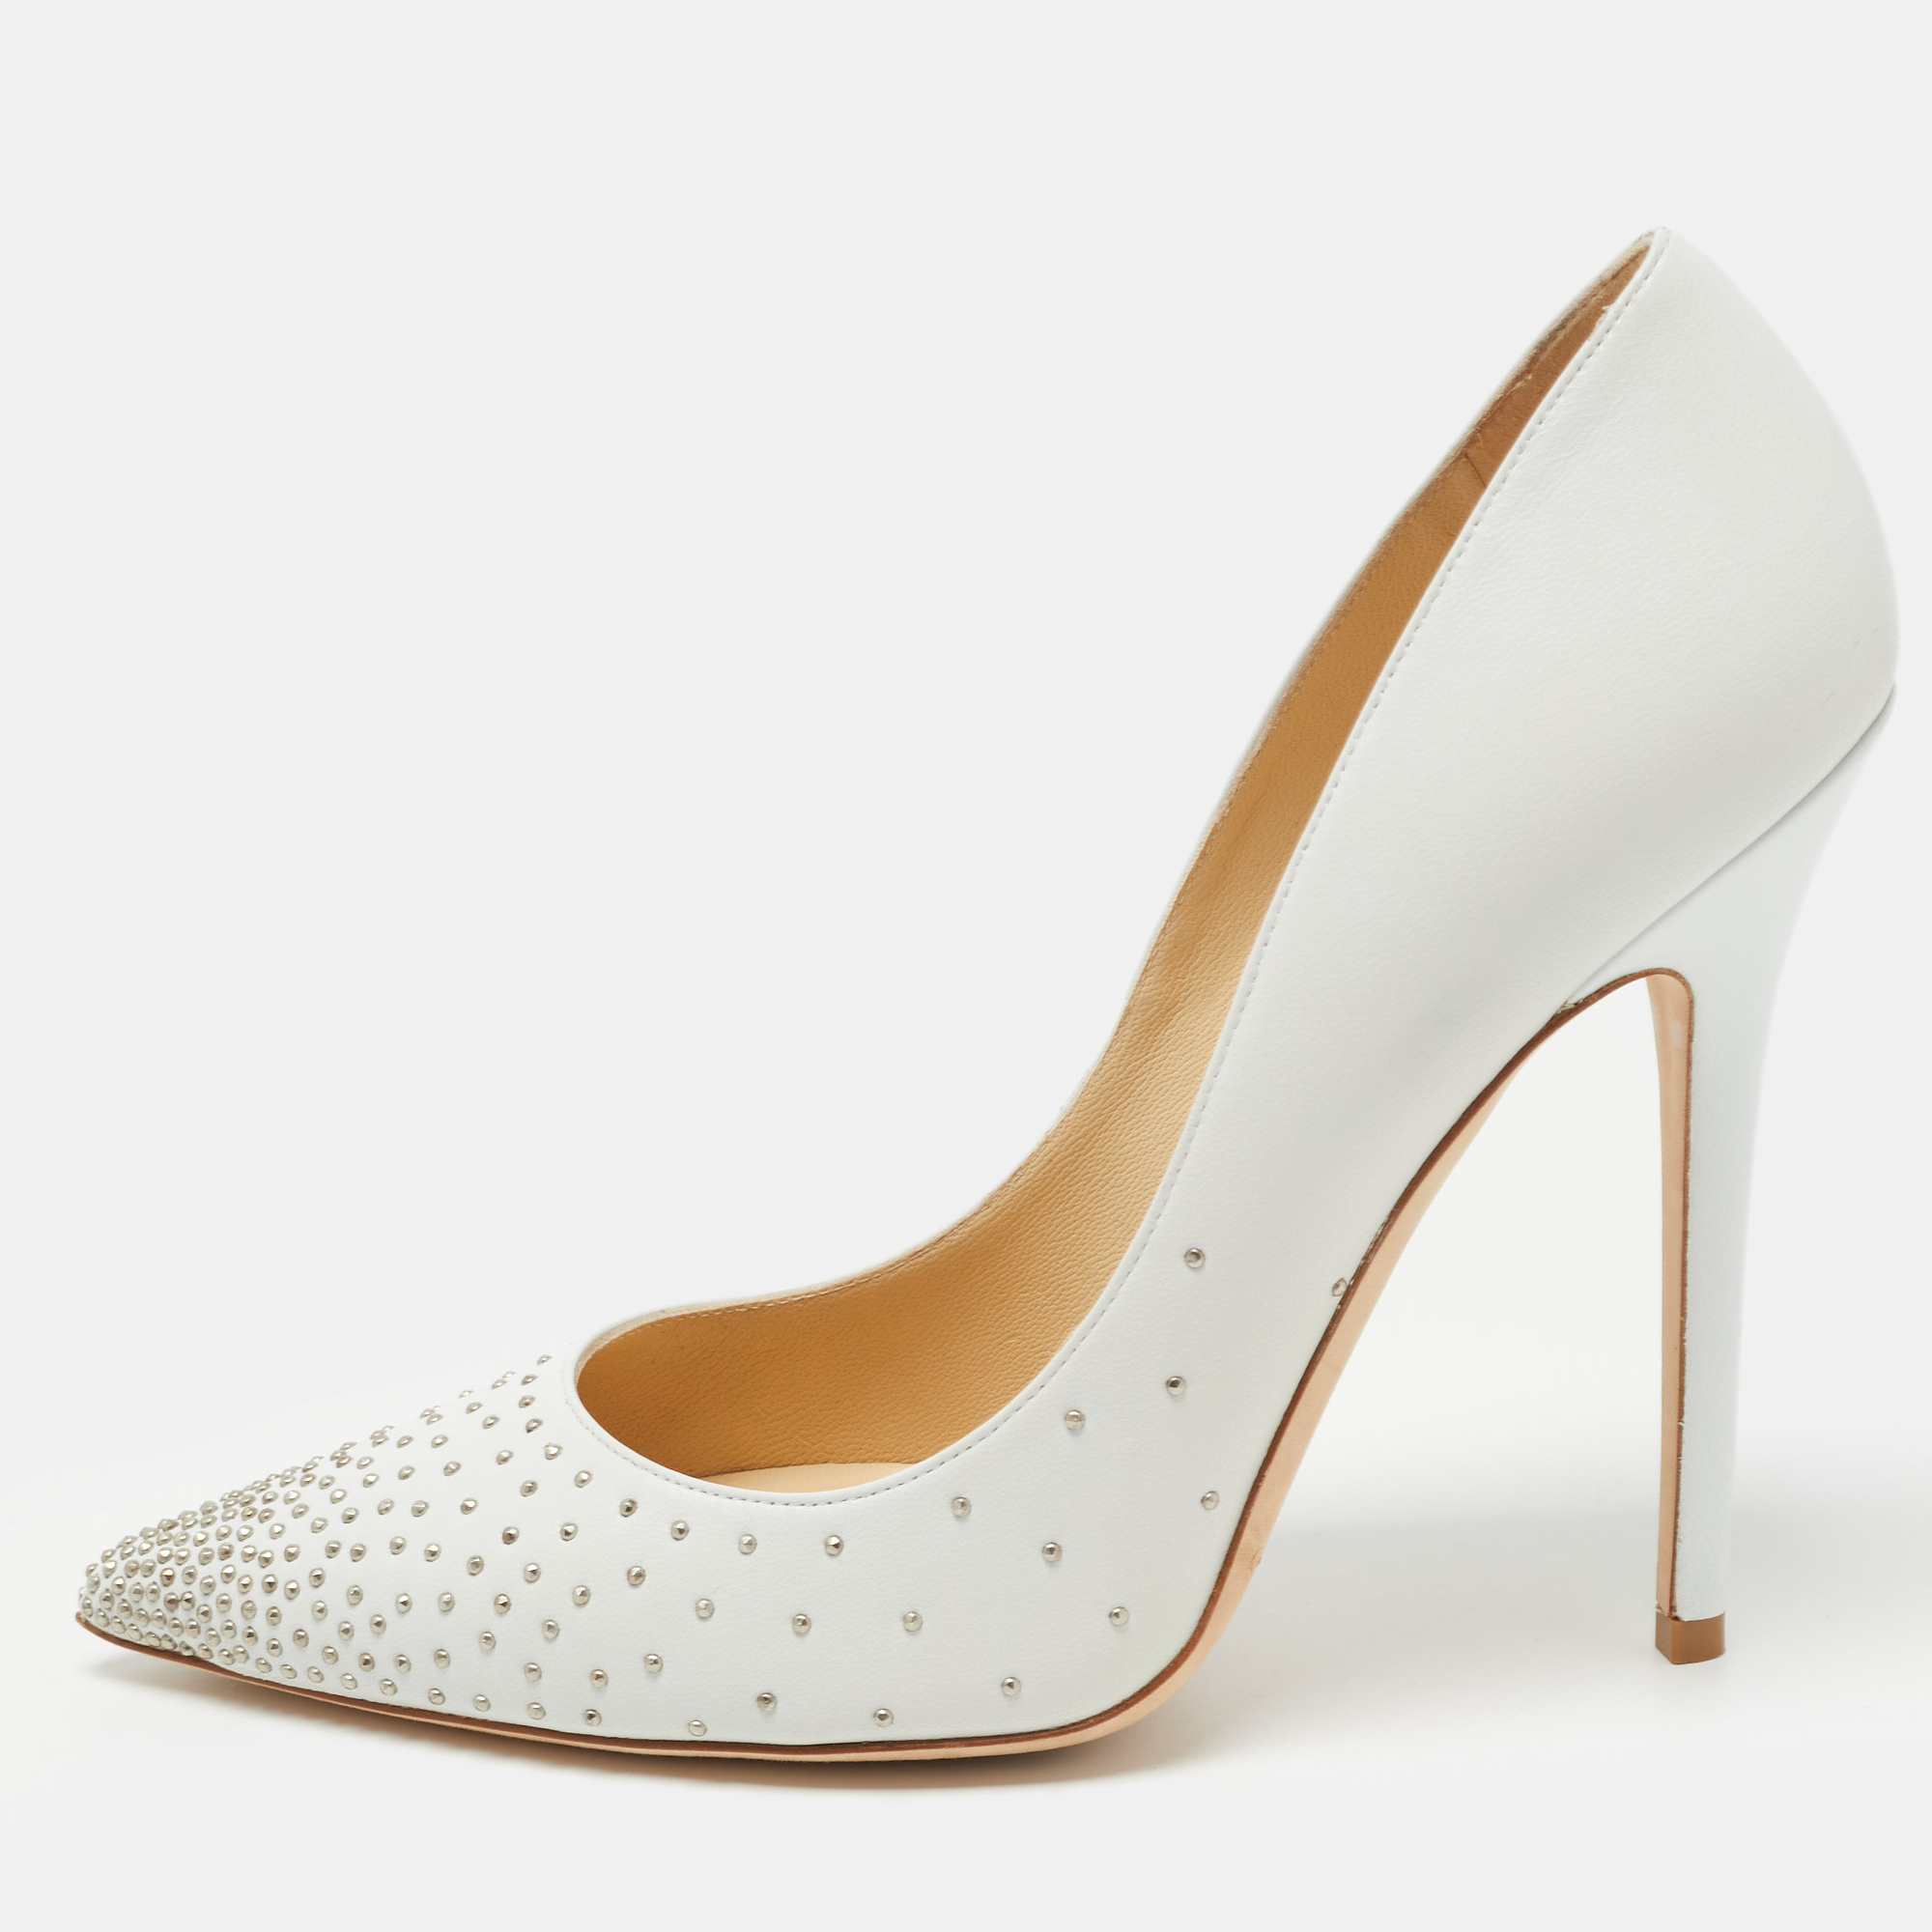 JIMMY CHOO Pre-owned White Leather Anouk Pumps Size 40